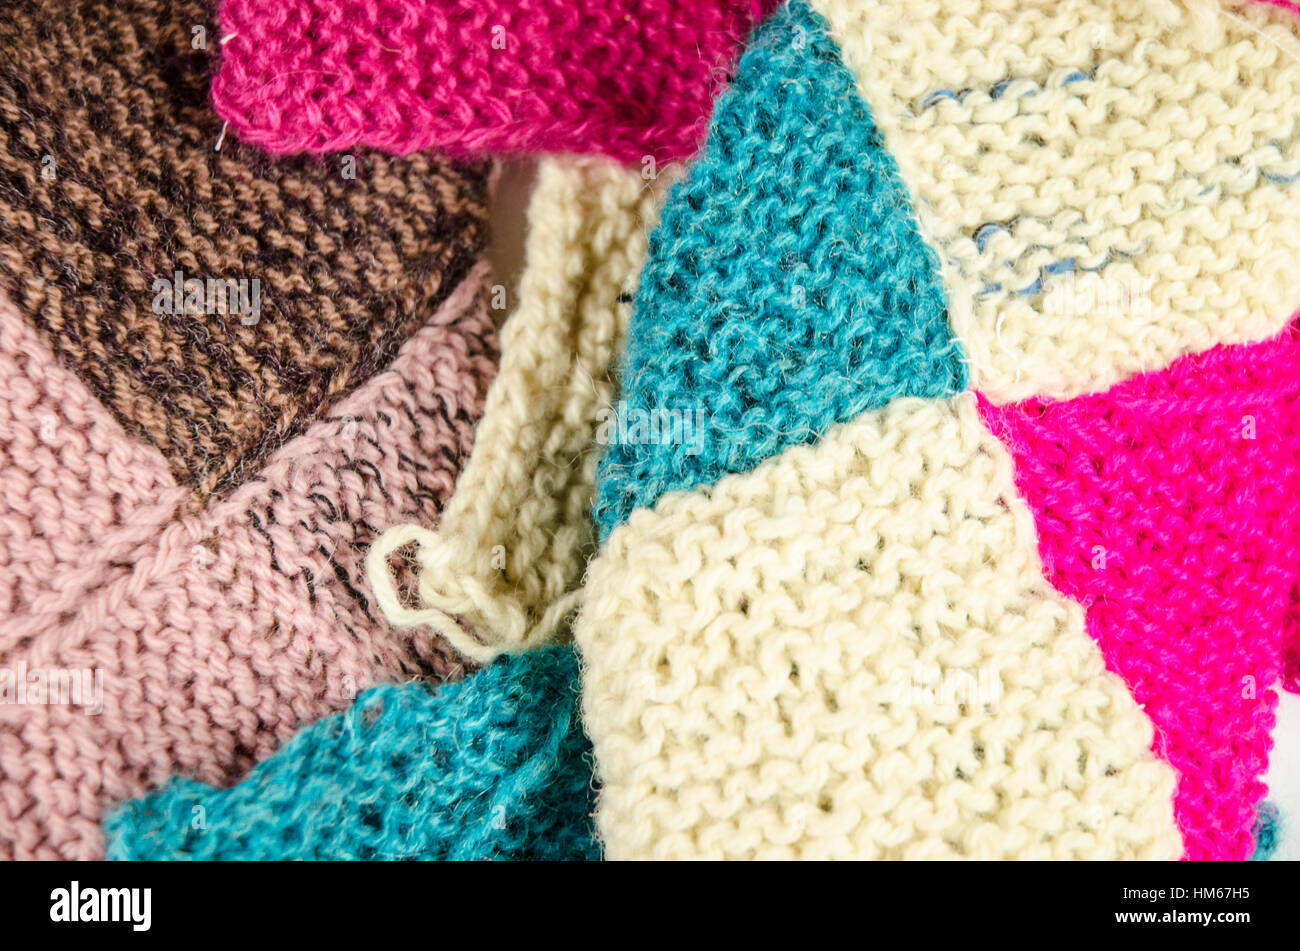 Knitting traditional woolen colorful sweater Stock Photo